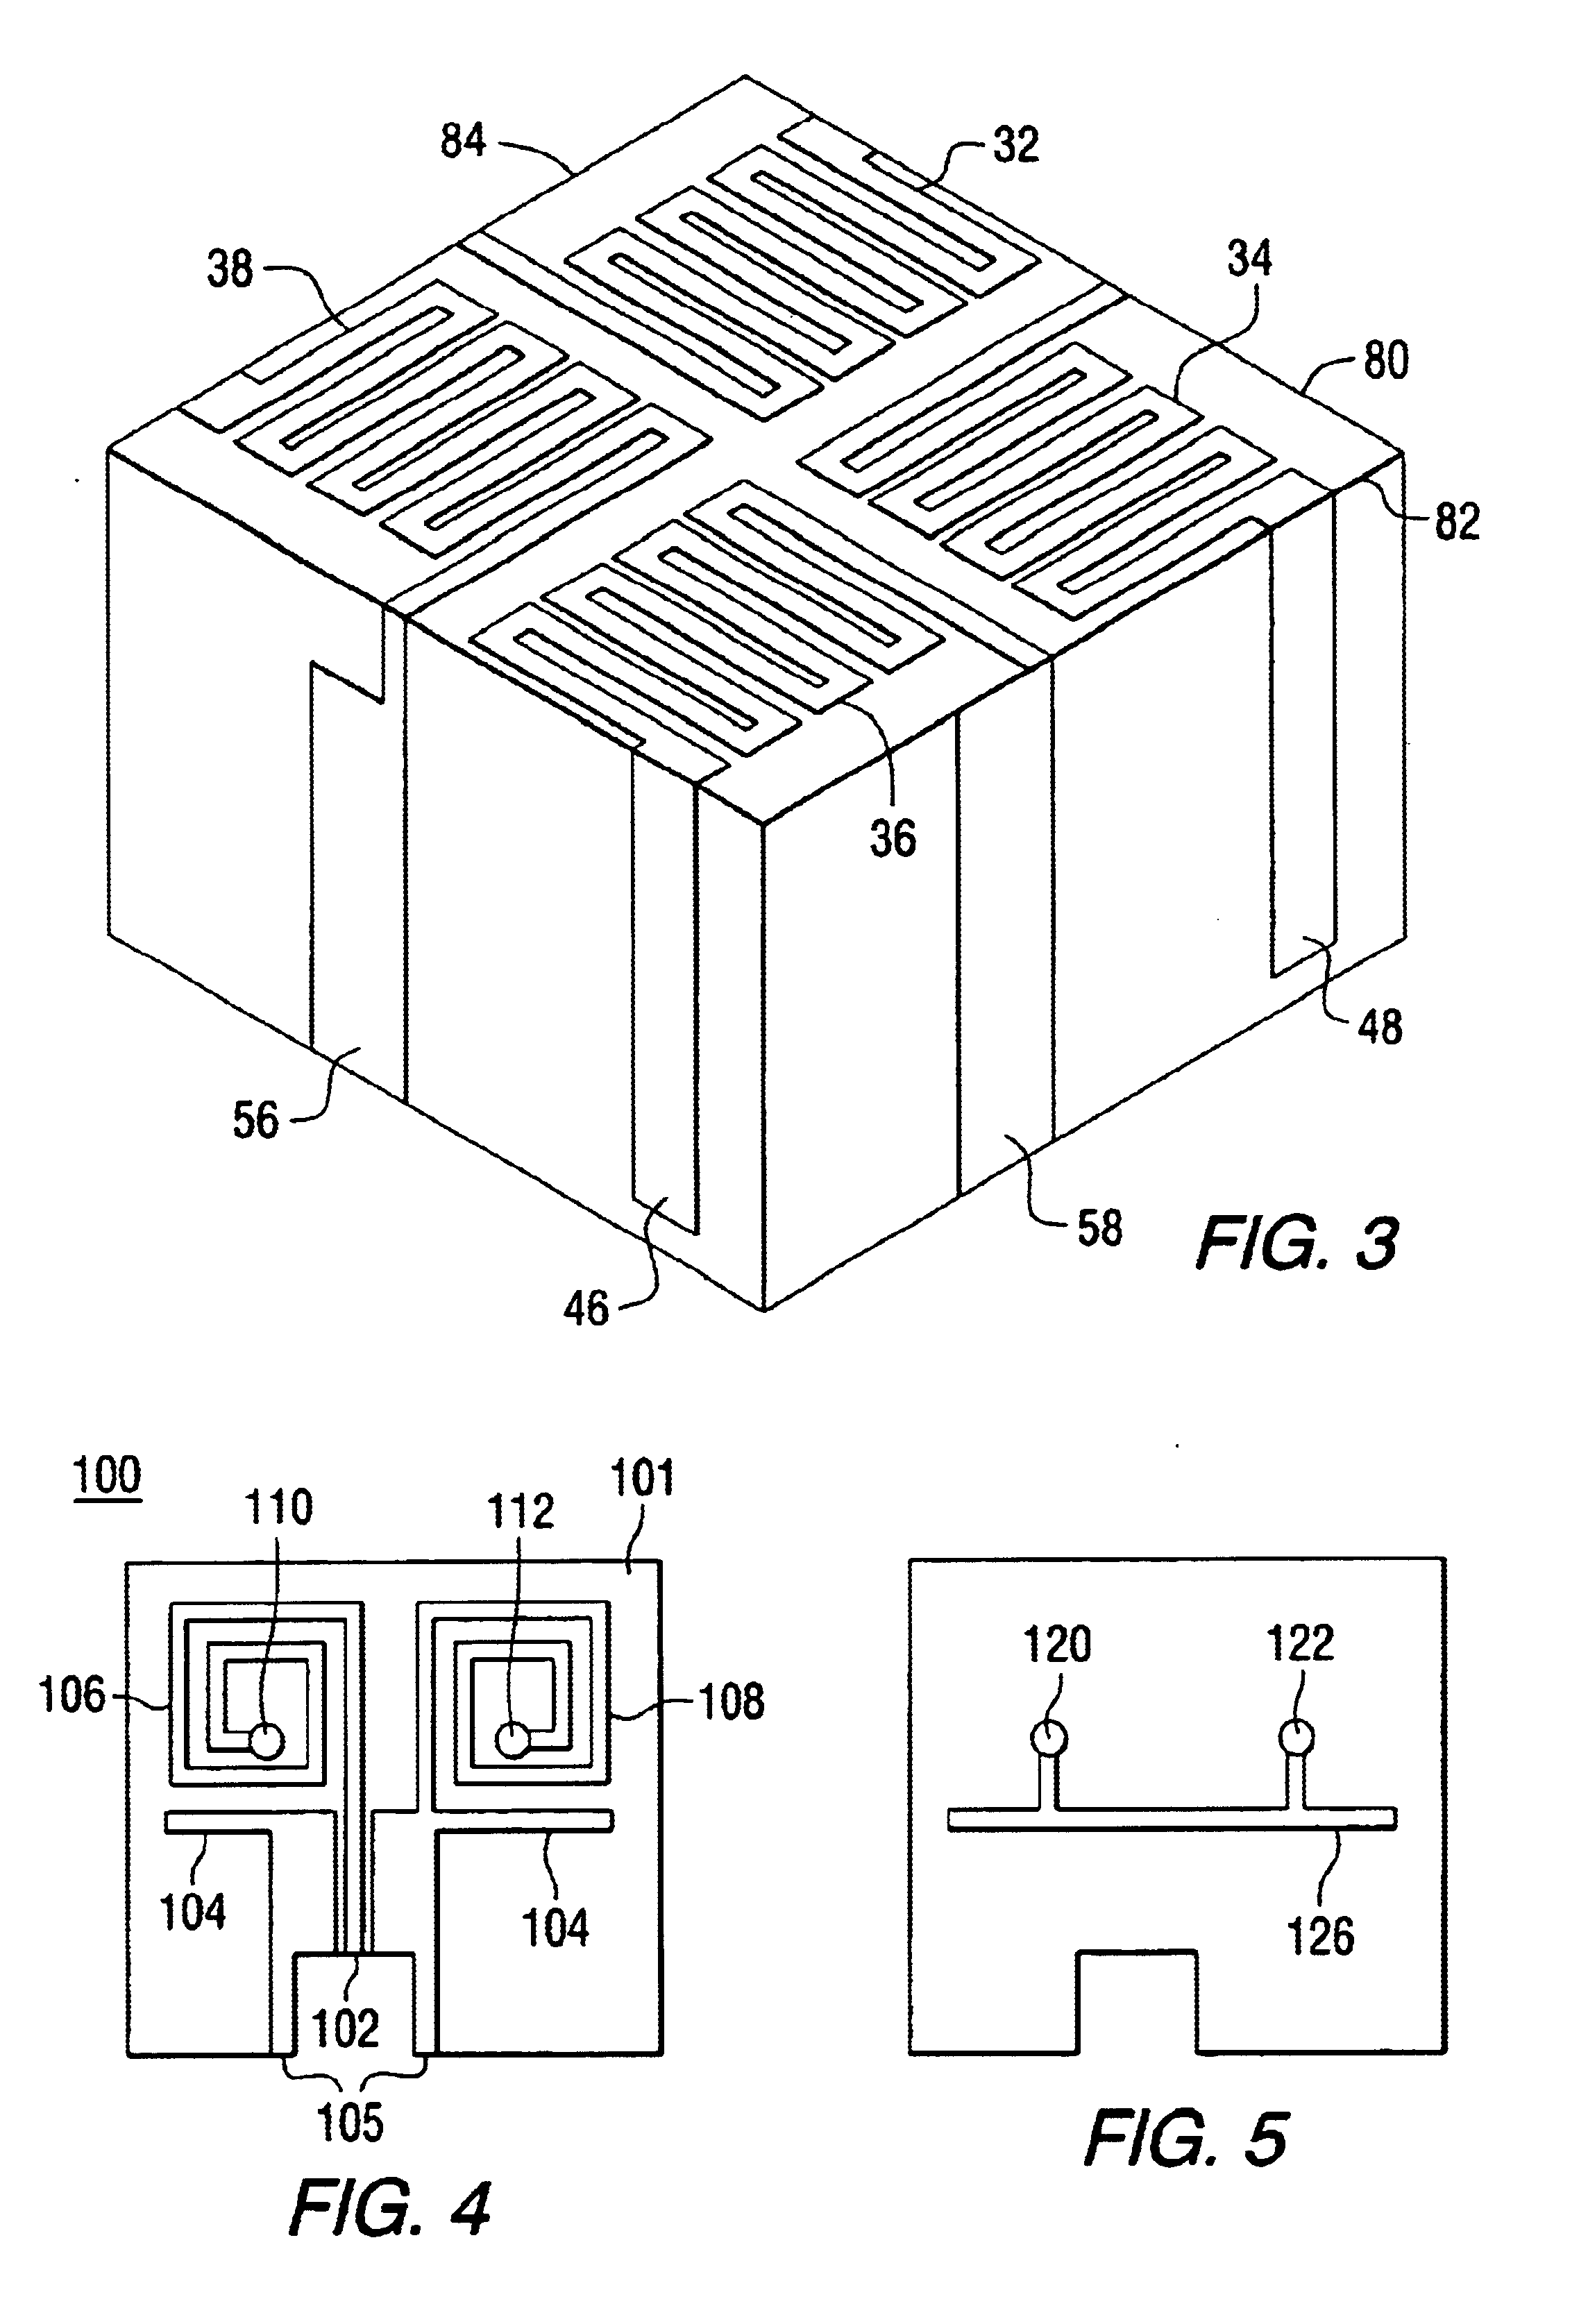 Fabrication method and apparatus for antenna structures in wireless communications devices